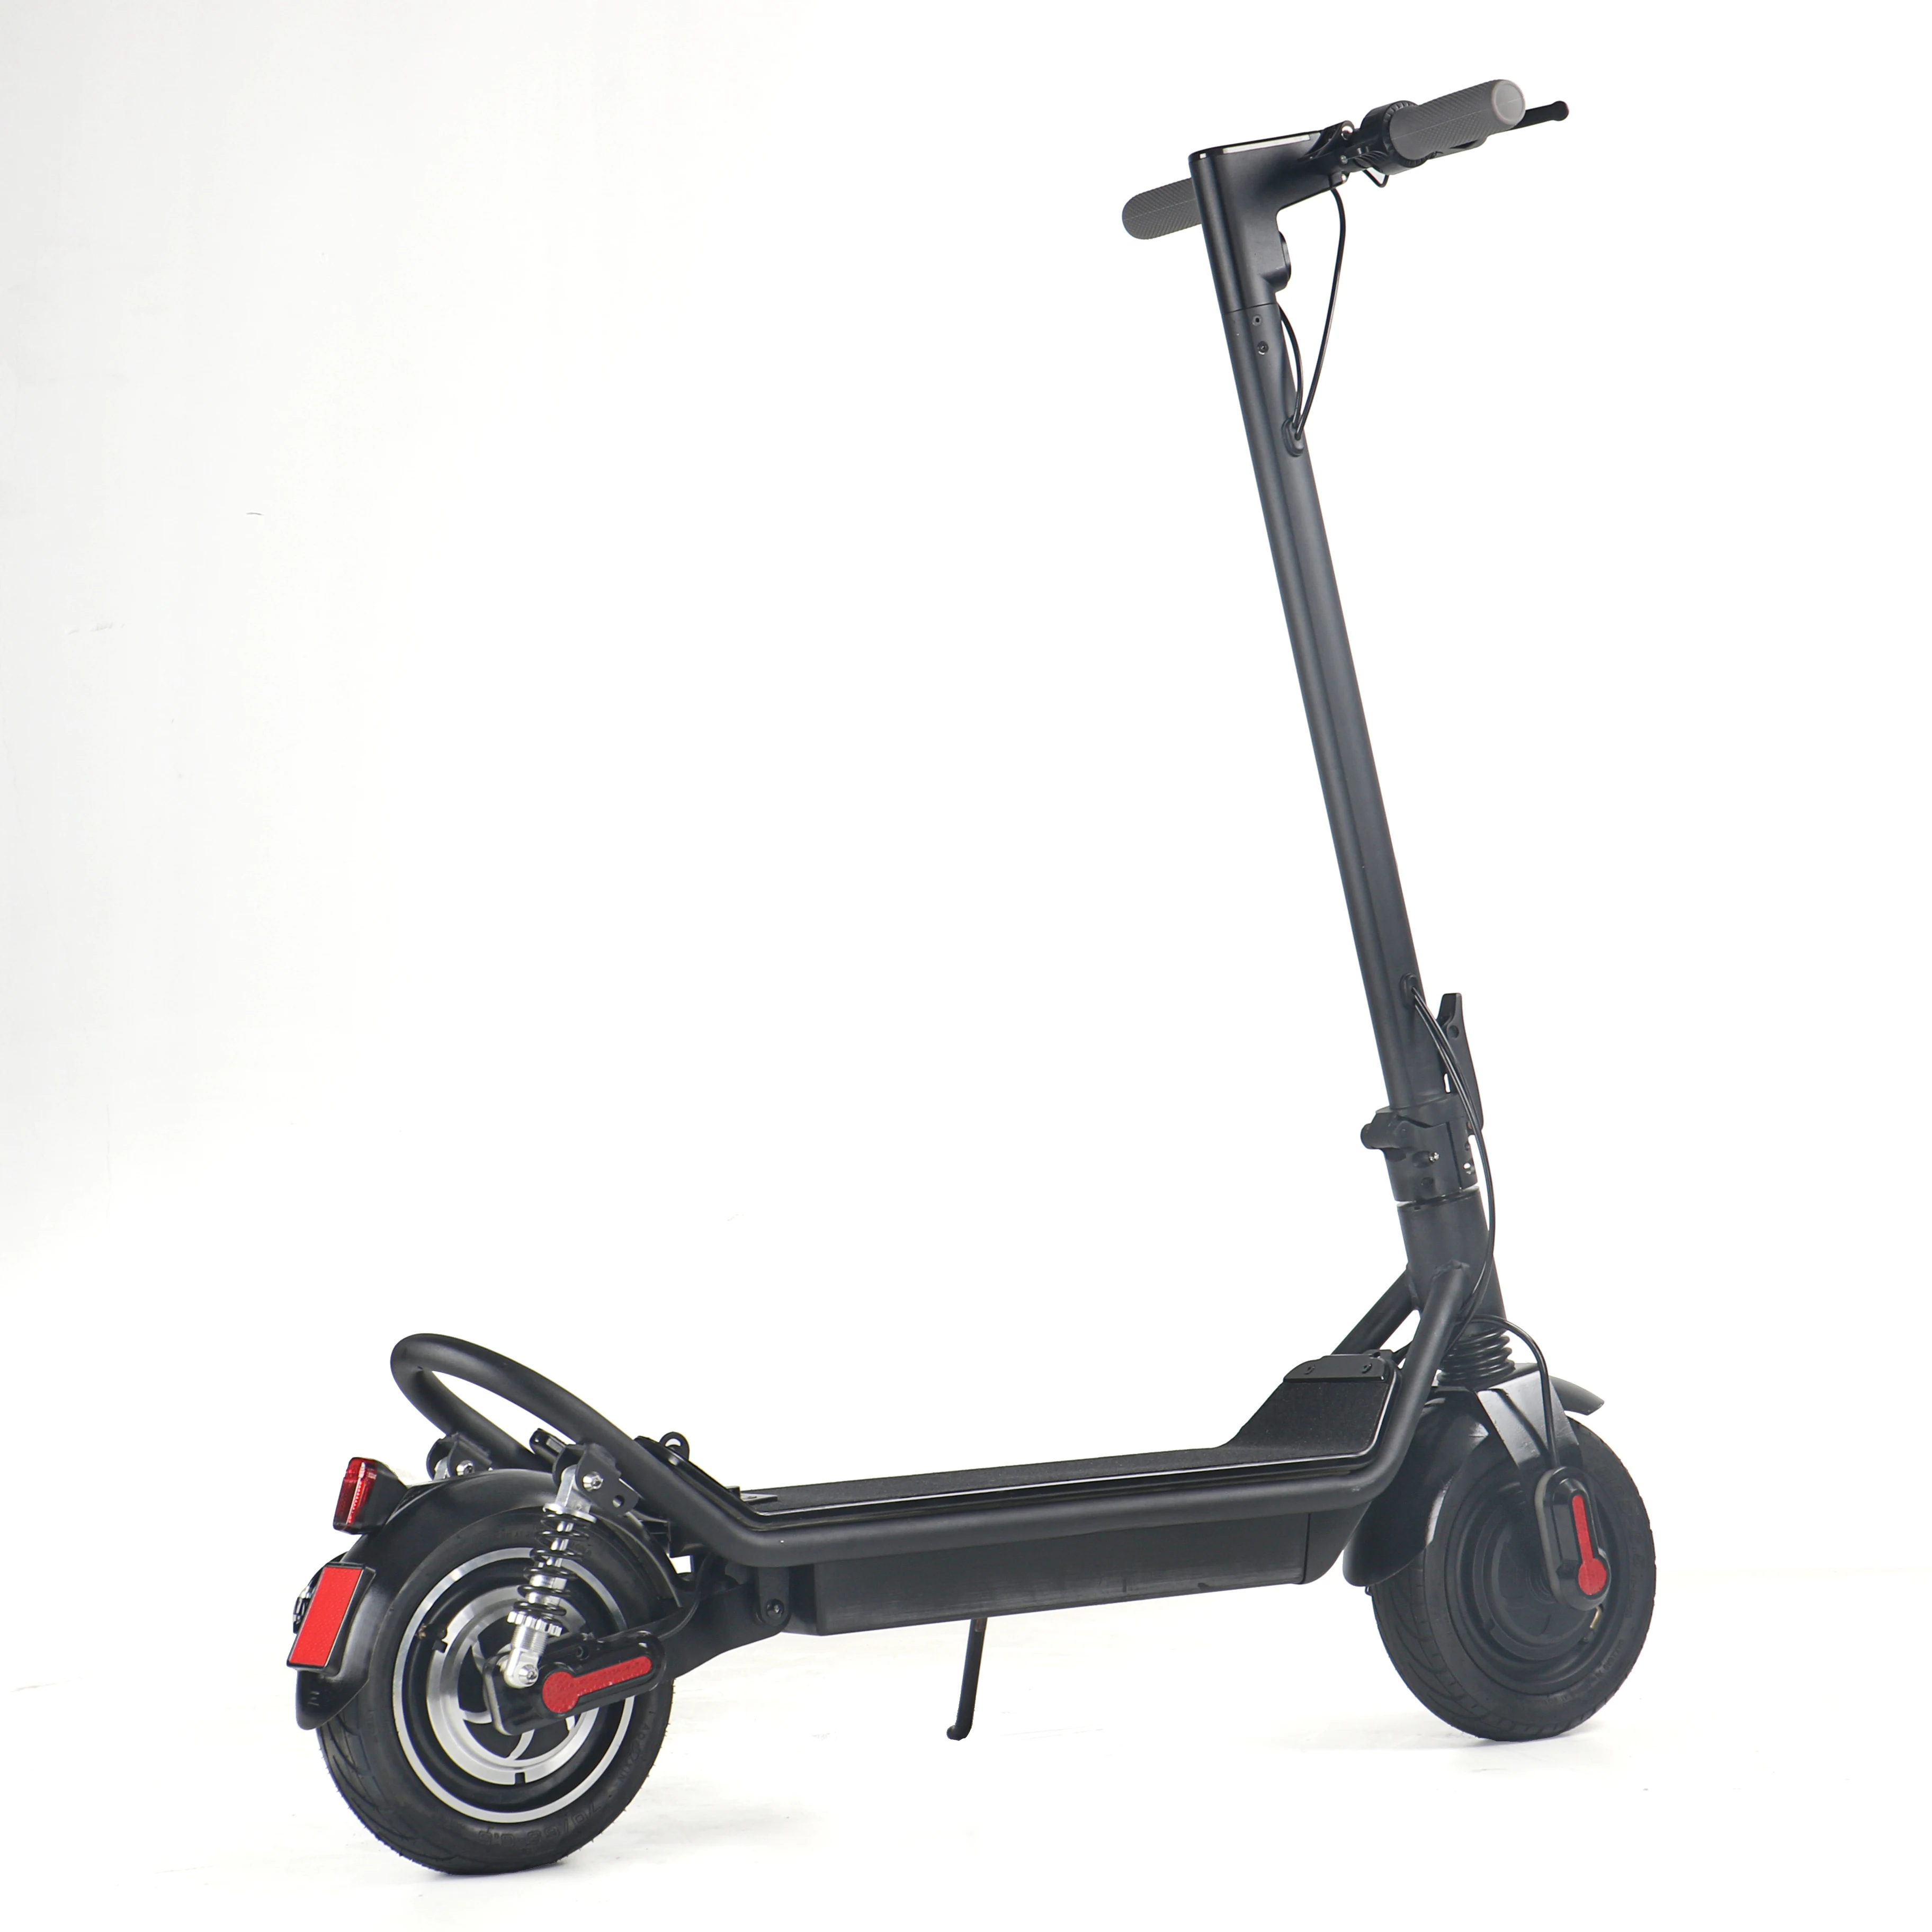 

New E4-7 1000w Dual motor foldable electric scooter cheap fast adult kids electric scooter, Black